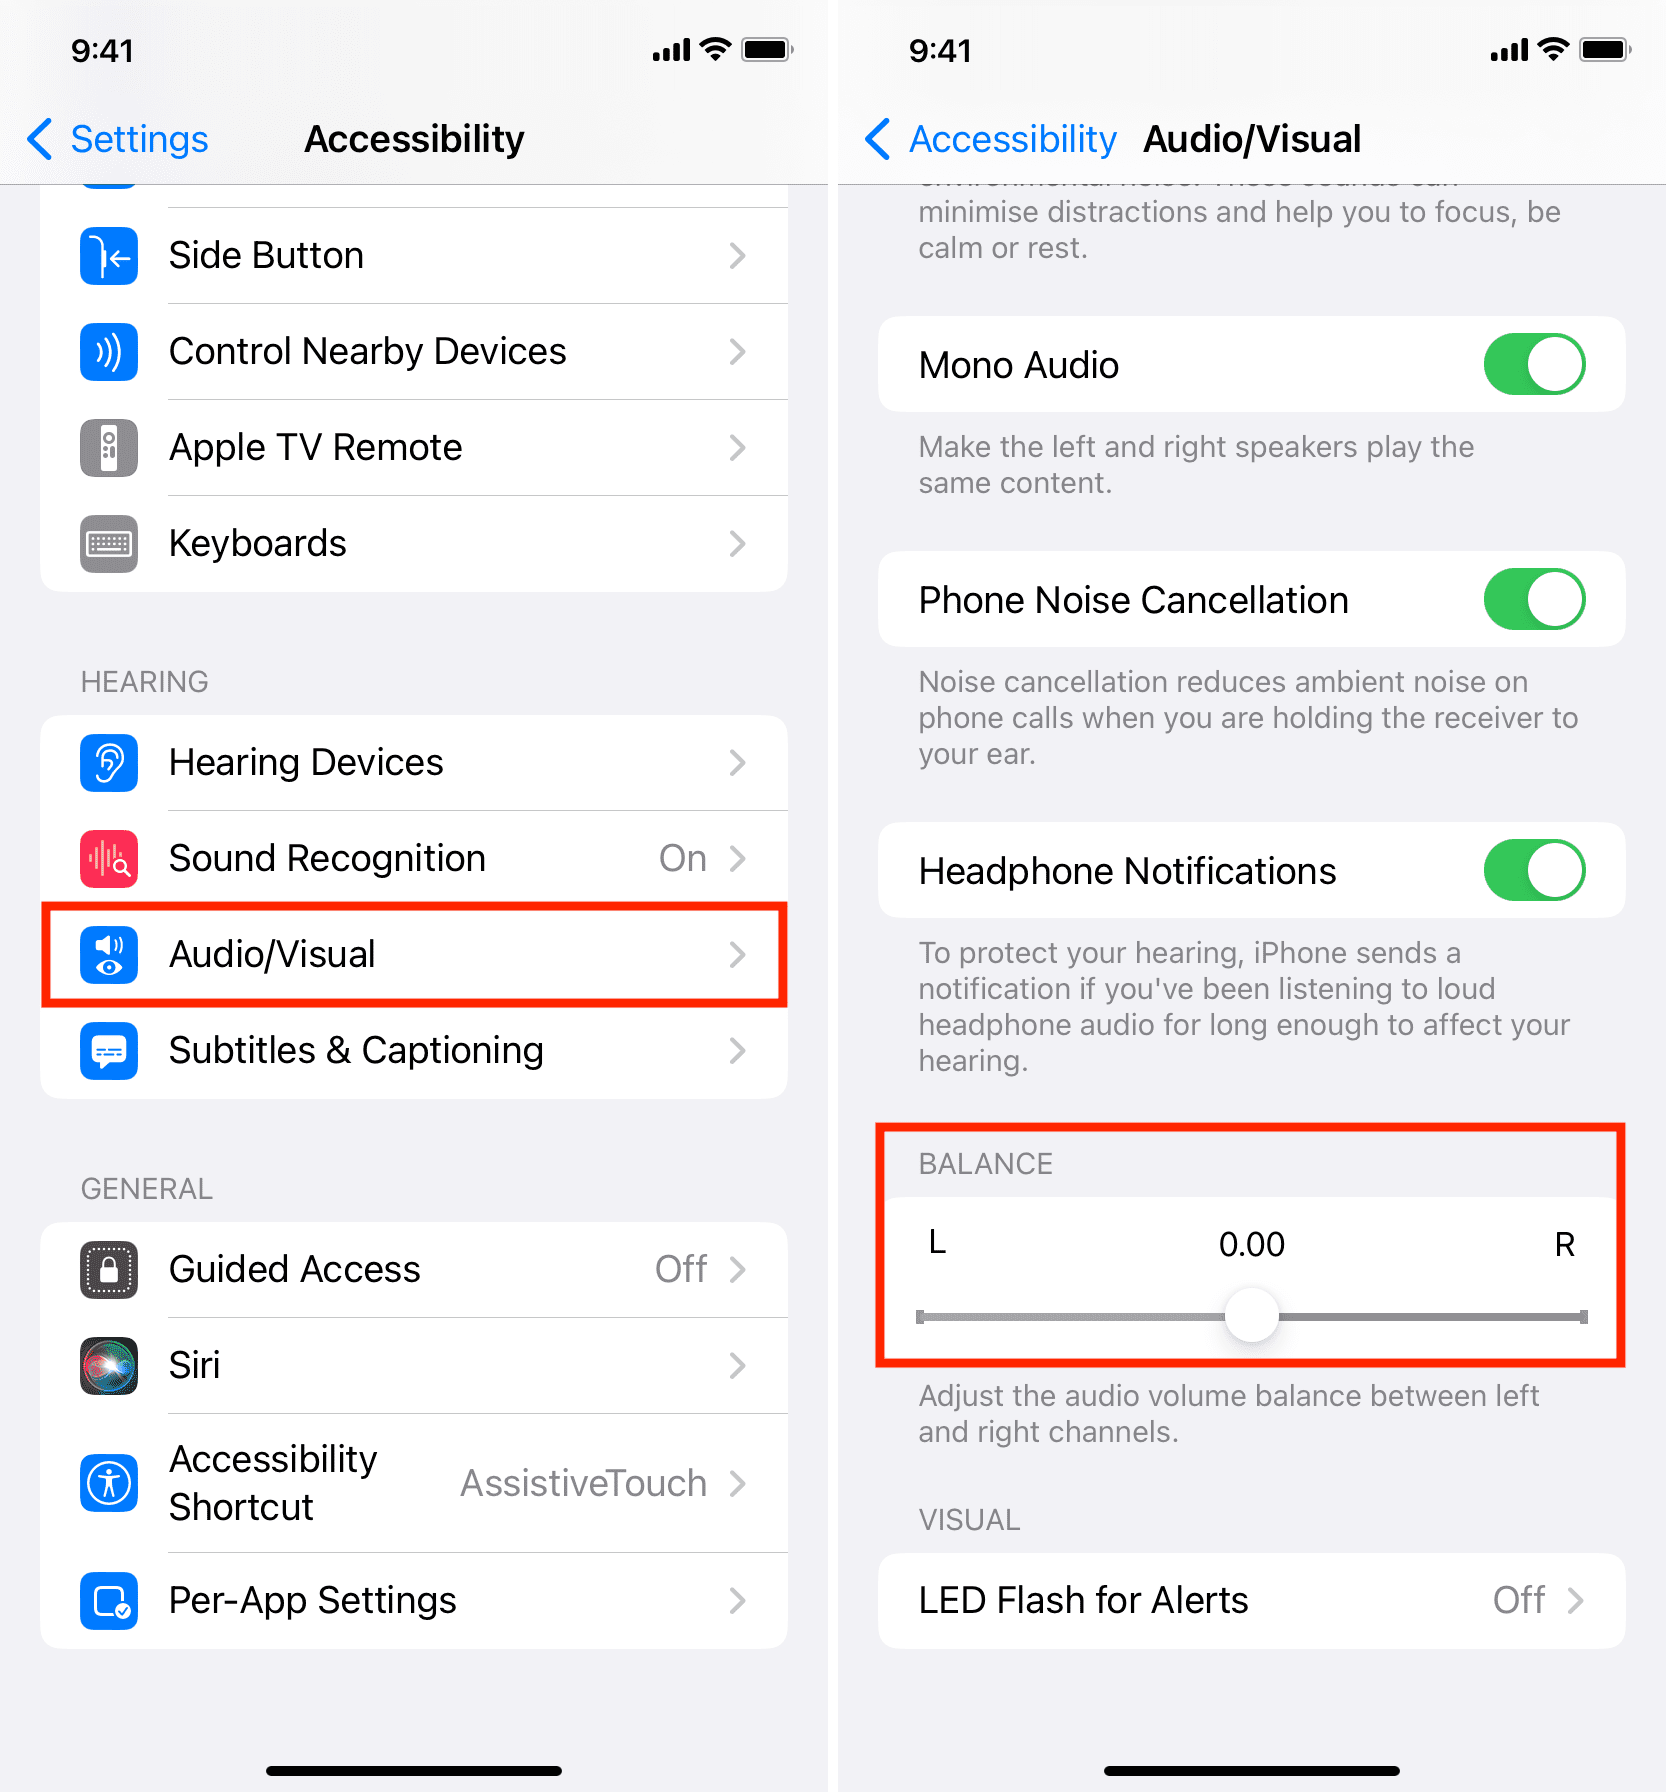 Set audio balance on iPhone to 0.00 so that there is no imbalance in left and right AirPod